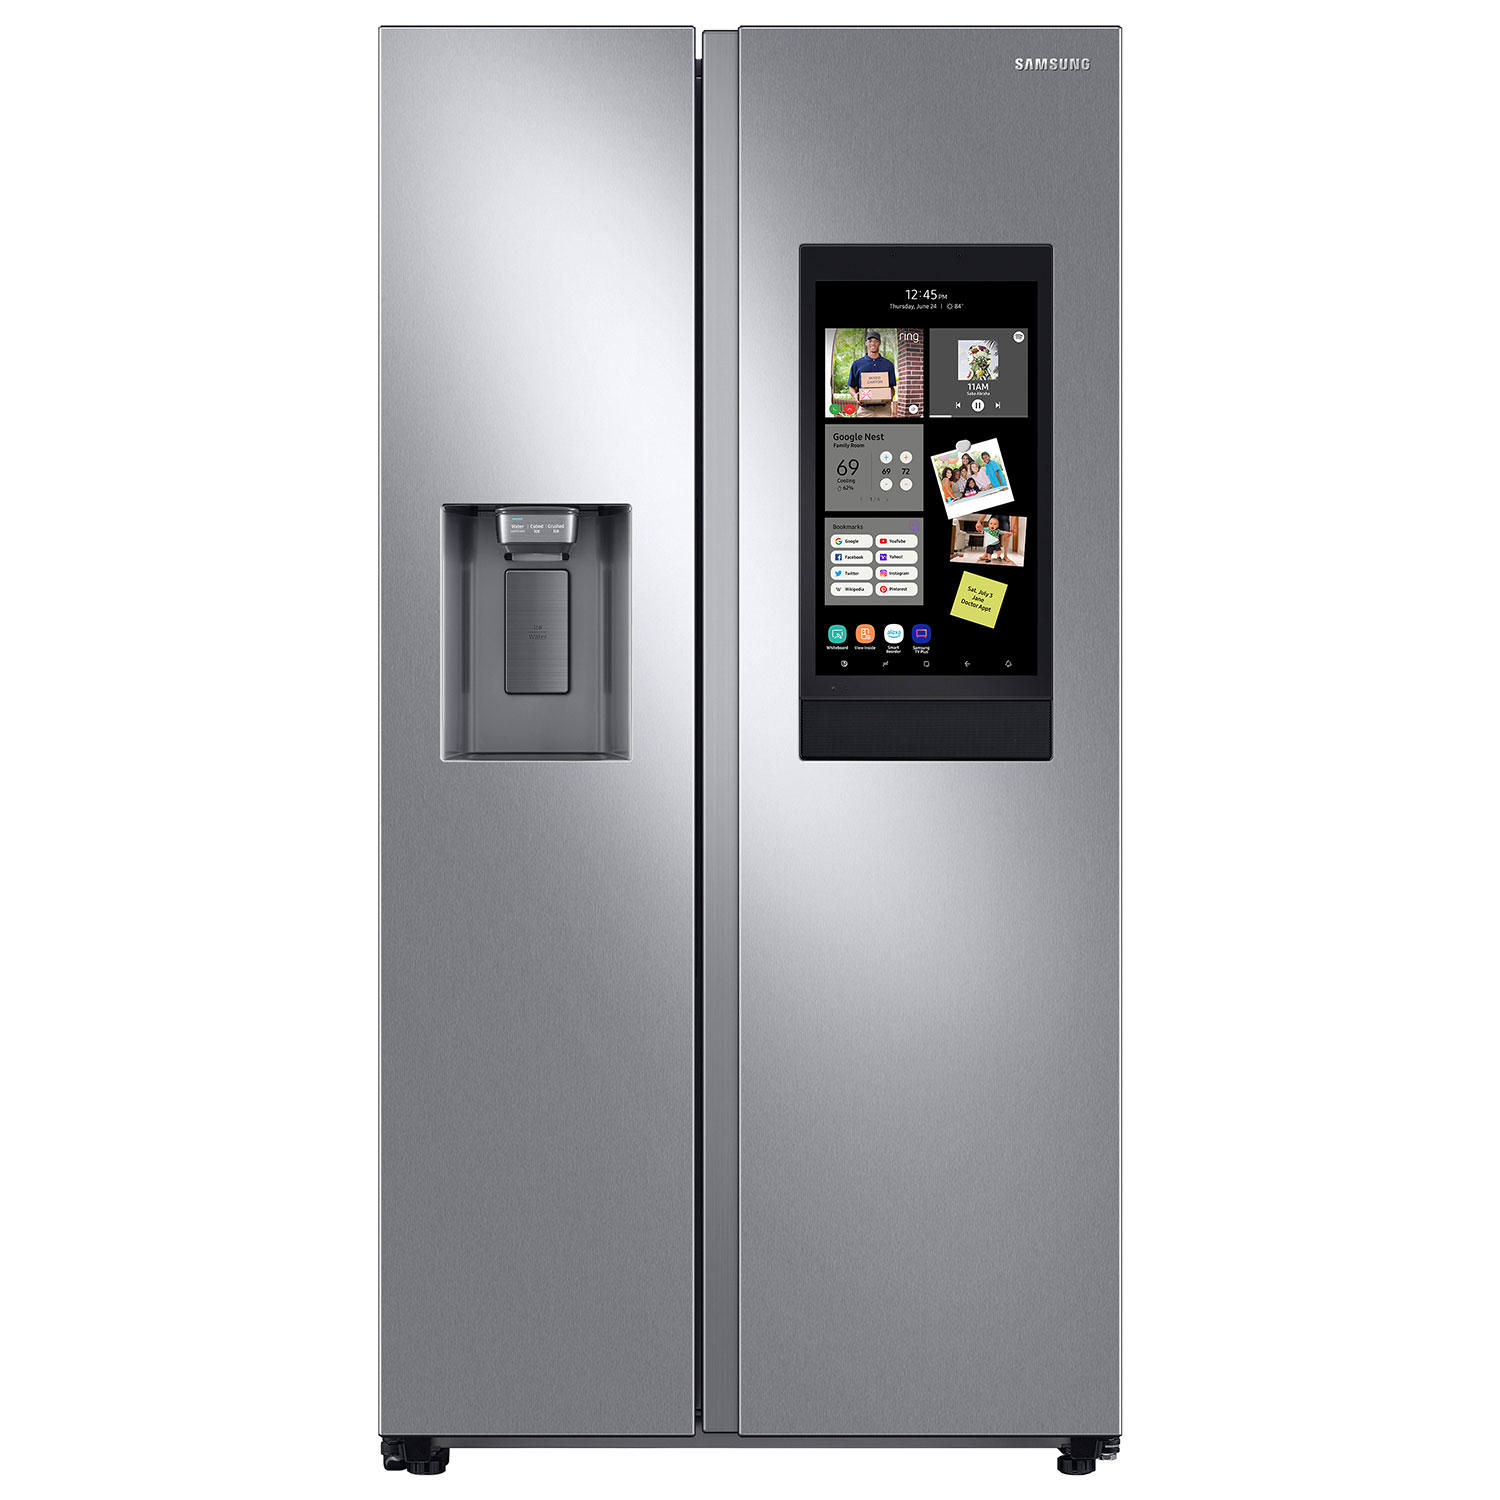 Samsung 26.7 Cu. Ft. Refrigerator with Family Hub (Stainless Steel)